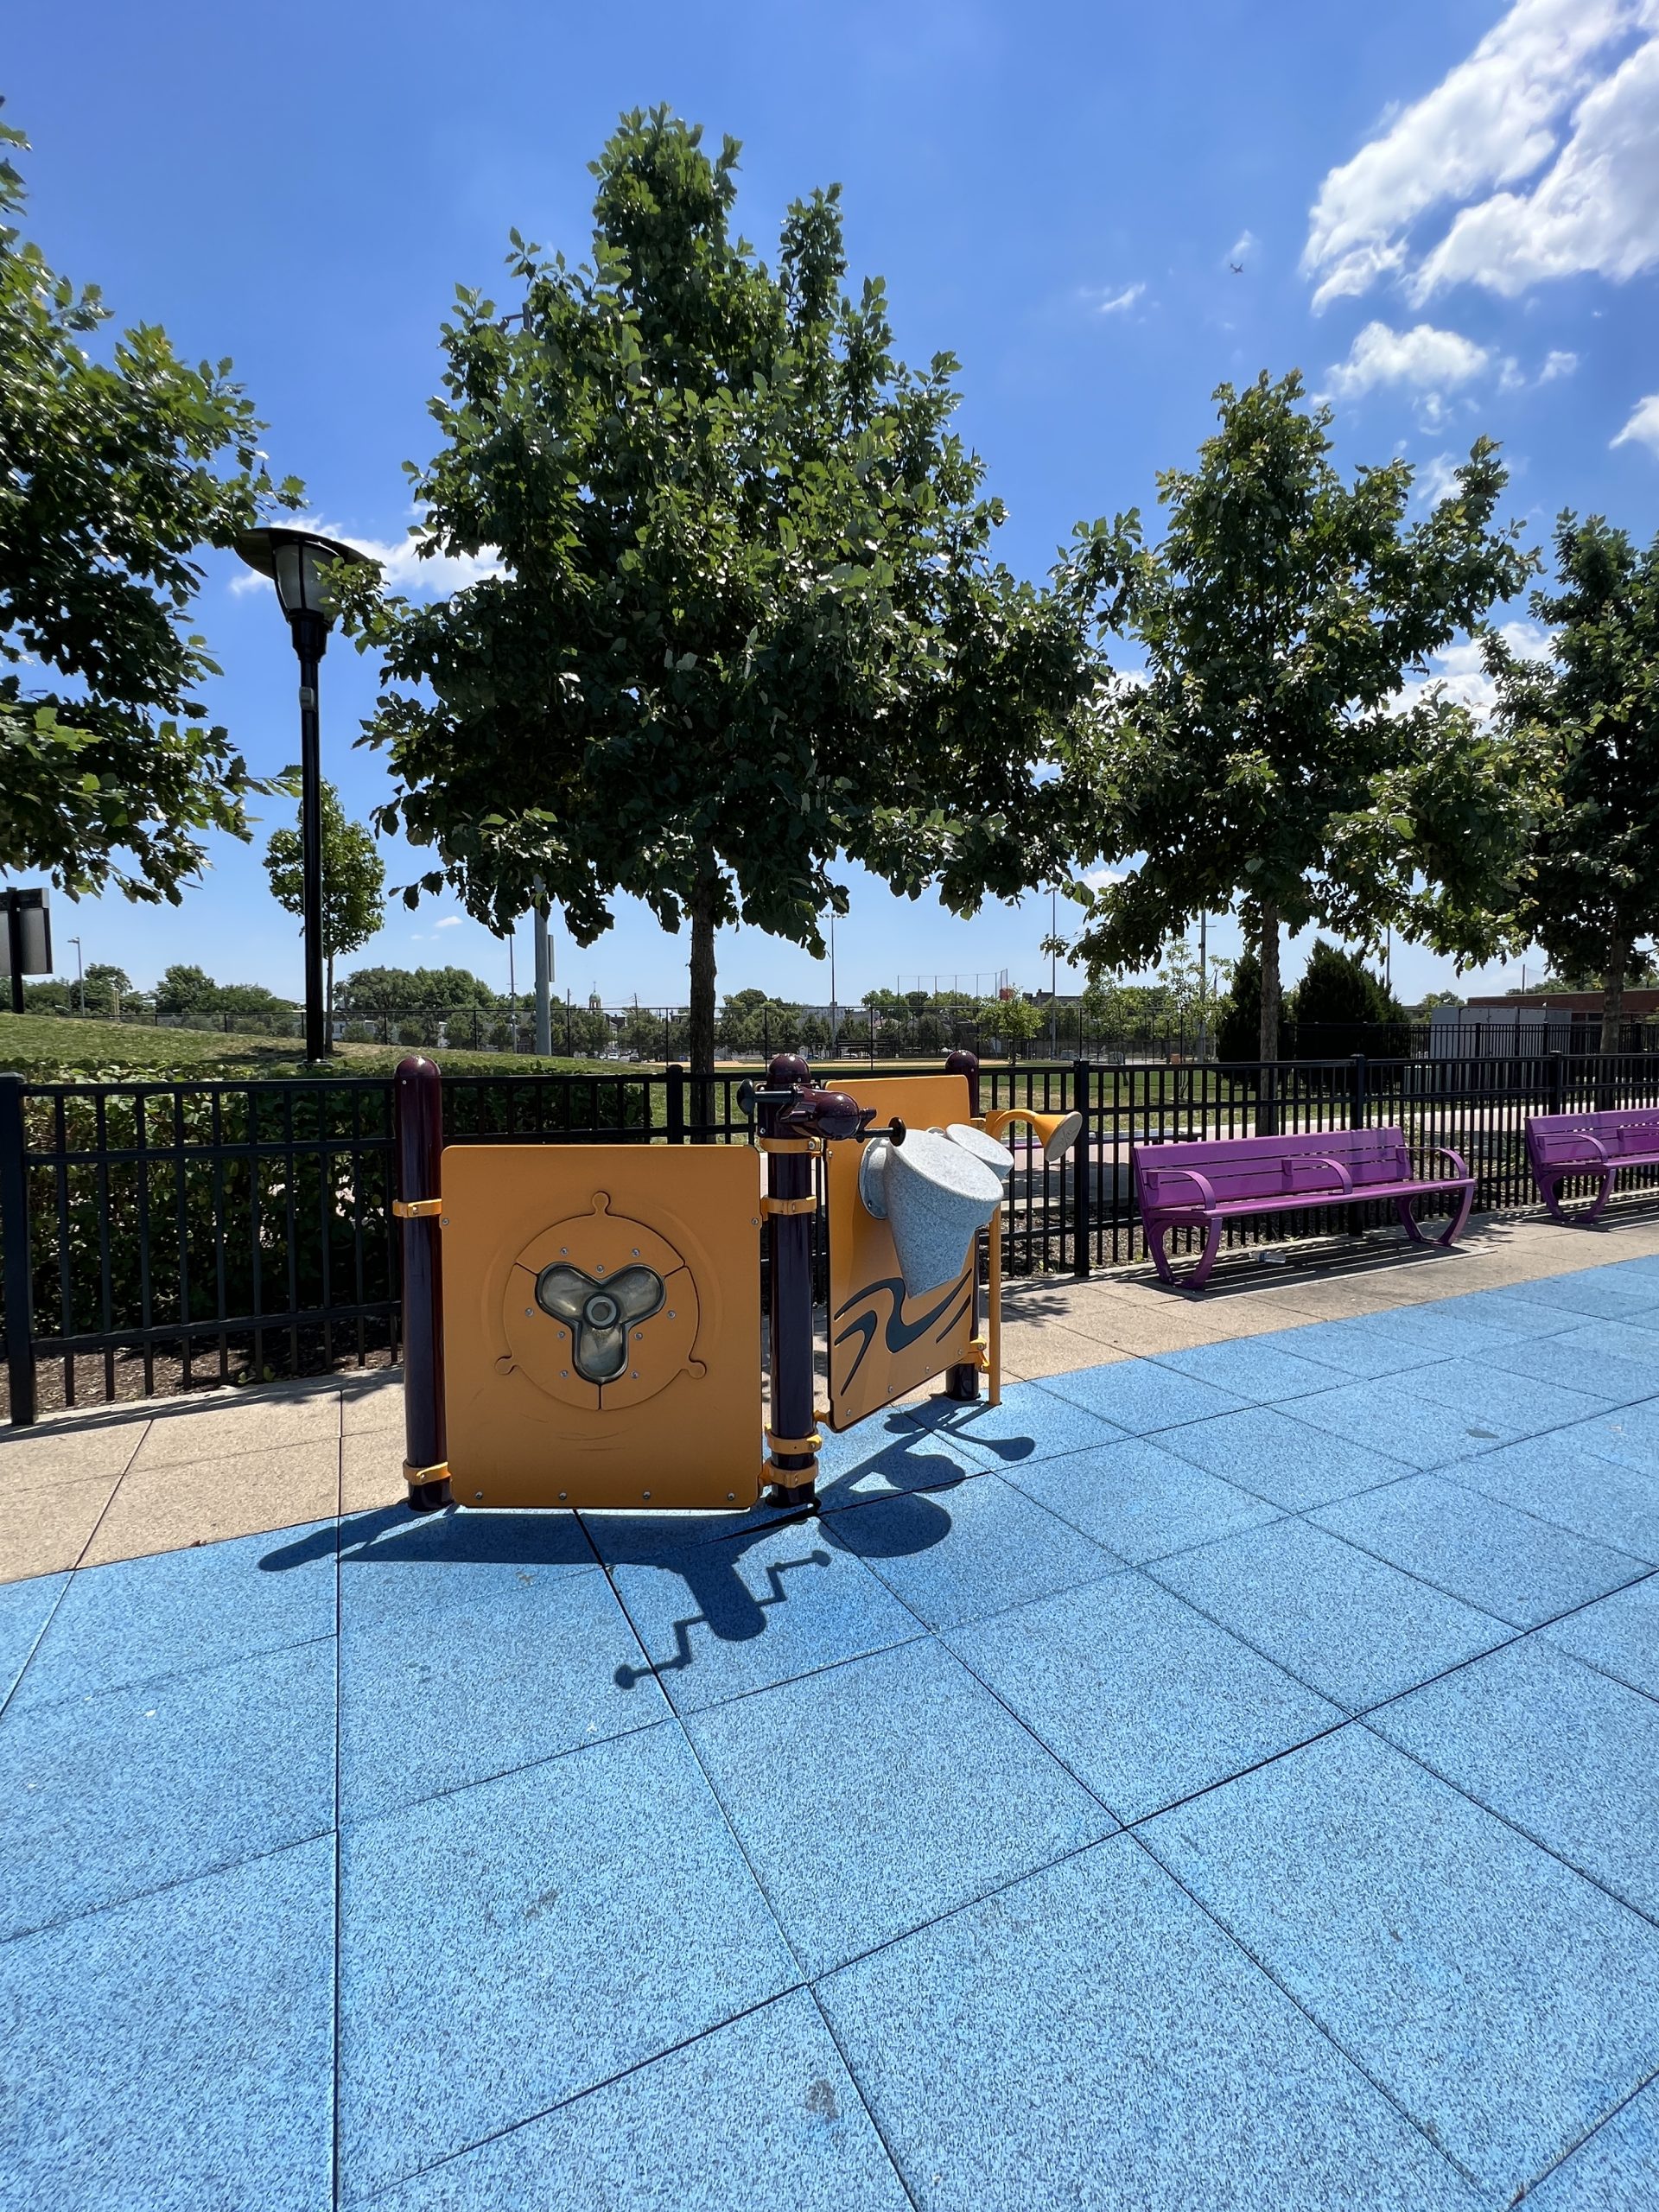 Berry Lane Park Playground in Jersey City NJ accessible musical sensory play and hand bike